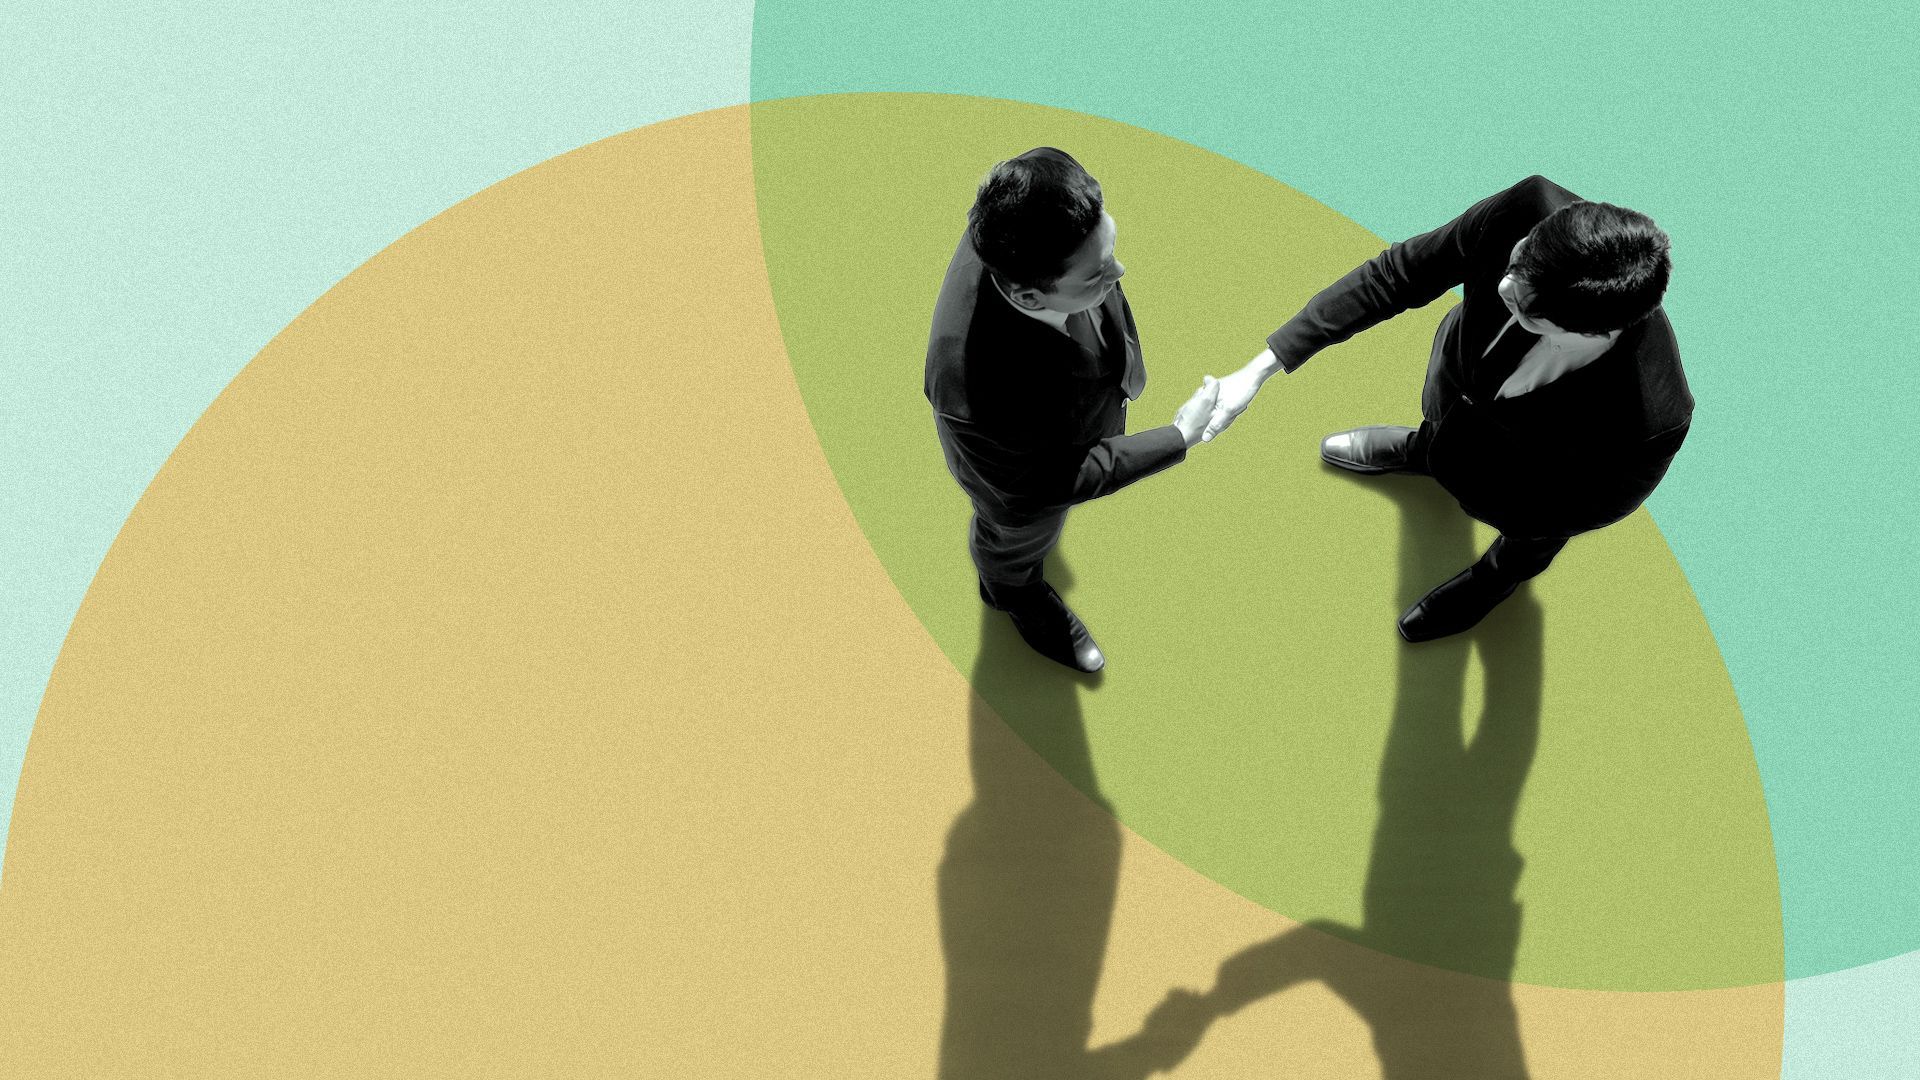 Illustration of two businessmen shaking hands while standing in the overlapping part of two circles.